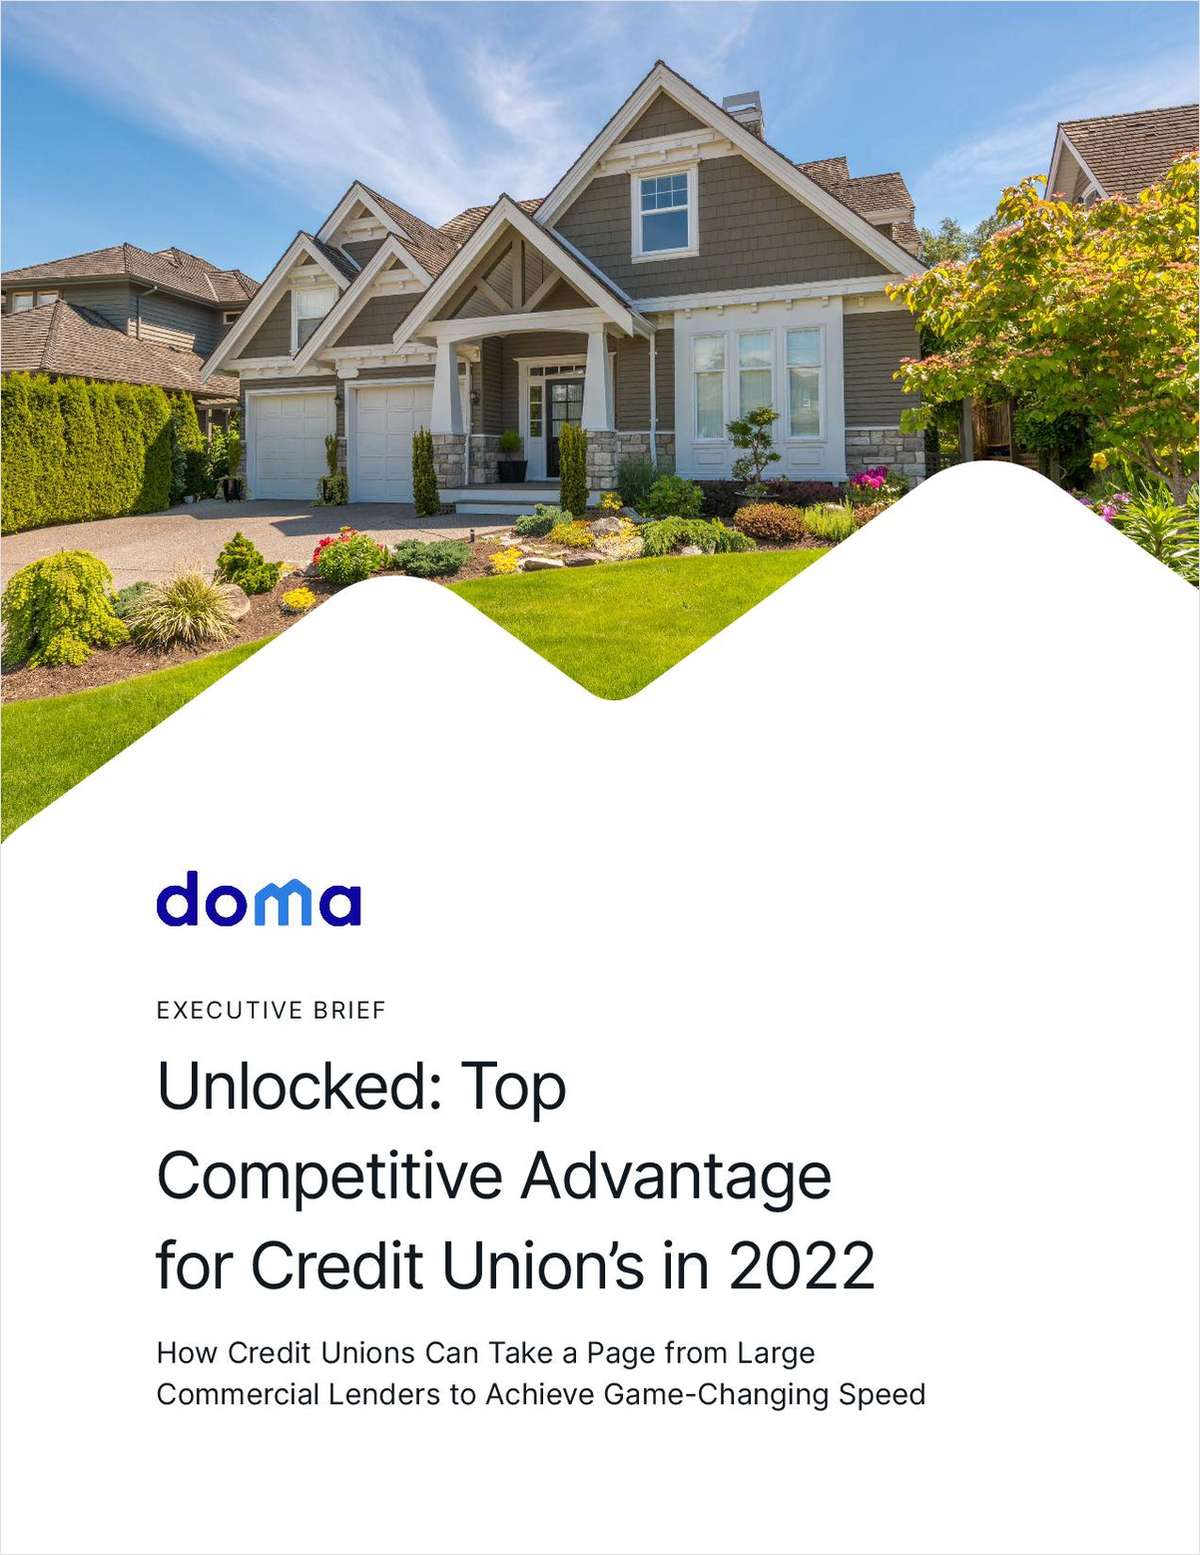 Unlocked: Top Competitive Advantage for Credit Unions in 2022